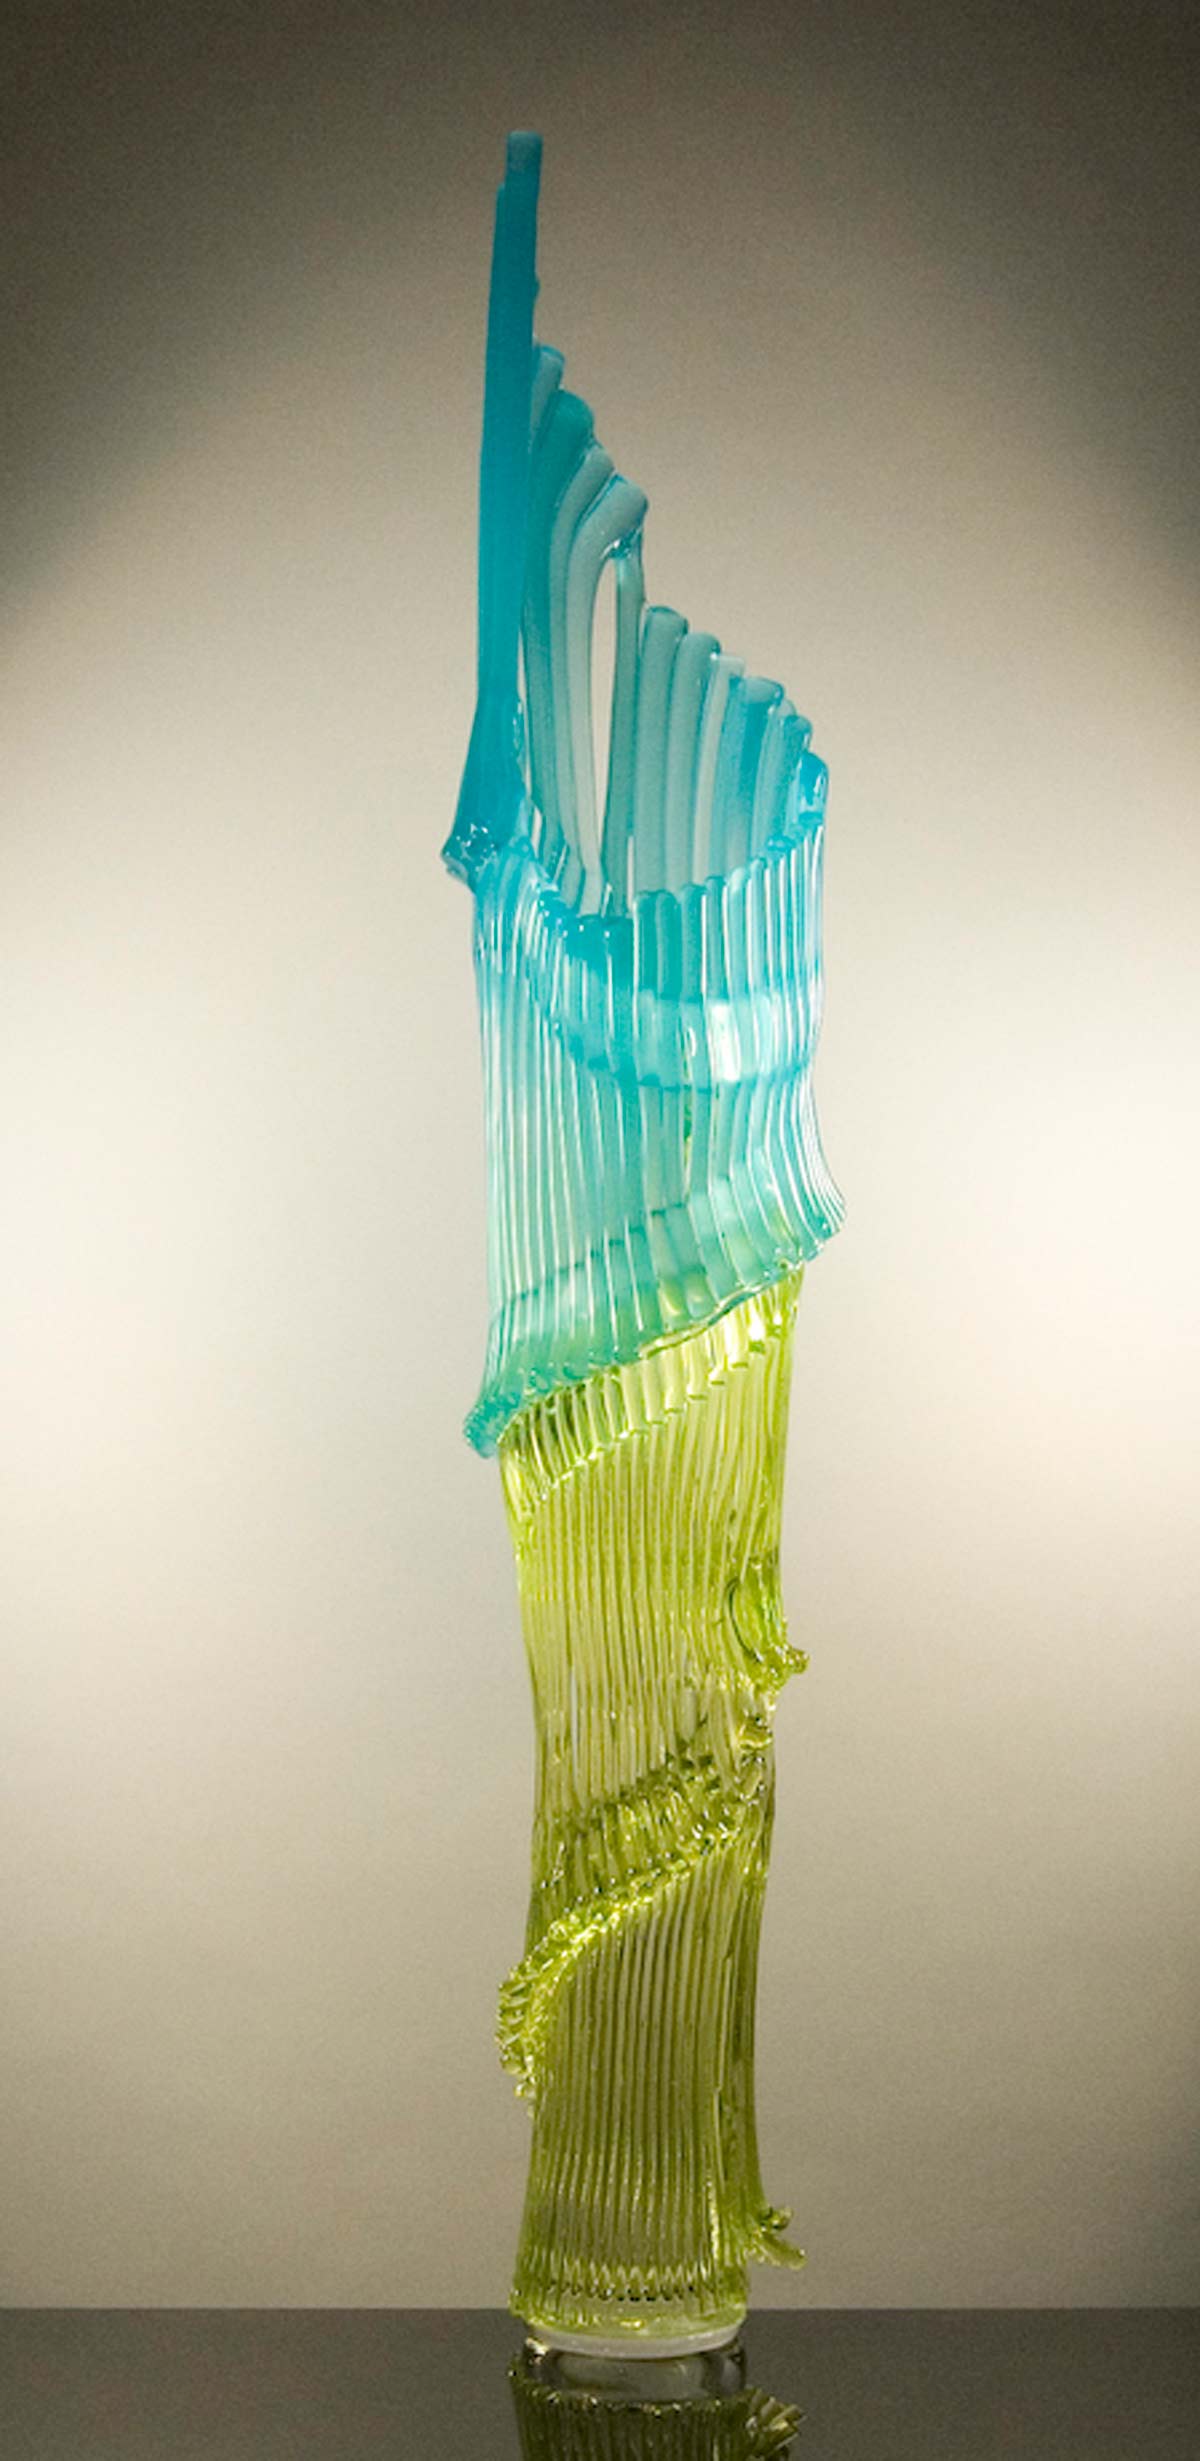 richard-royal-shelter-series-s03-45-turquoise-citrine-hot-glass-sculpture